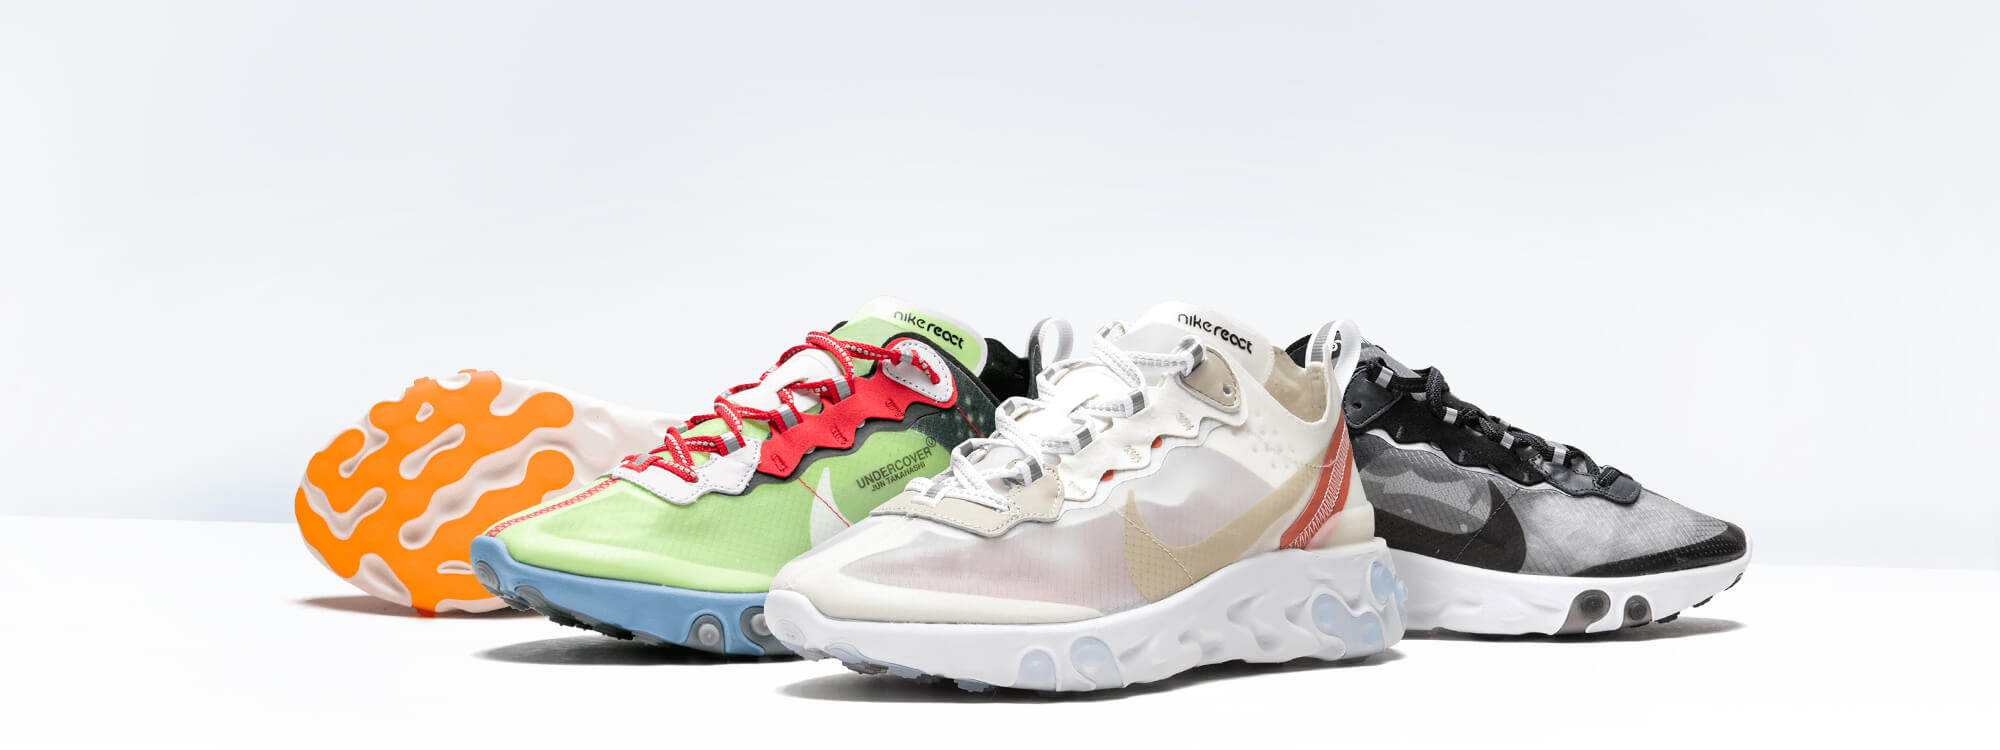 buy the best quality Nike React Element 87